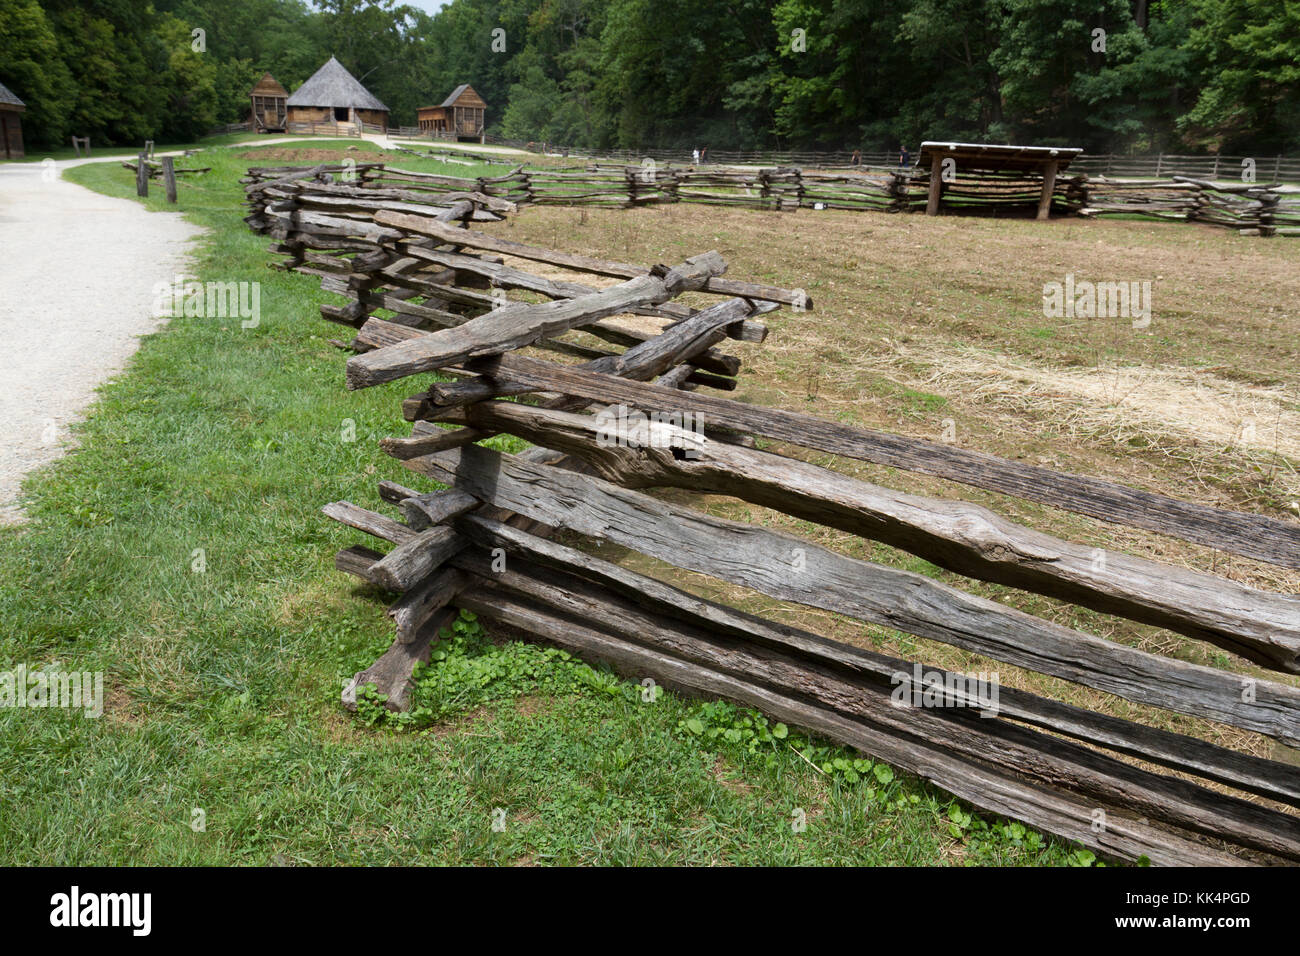 An example of split rail fencing (used to keep animals in an area), on the Pioneer Farm, Mount Vernon estate, Alexandria, Virginia. Stock Photo